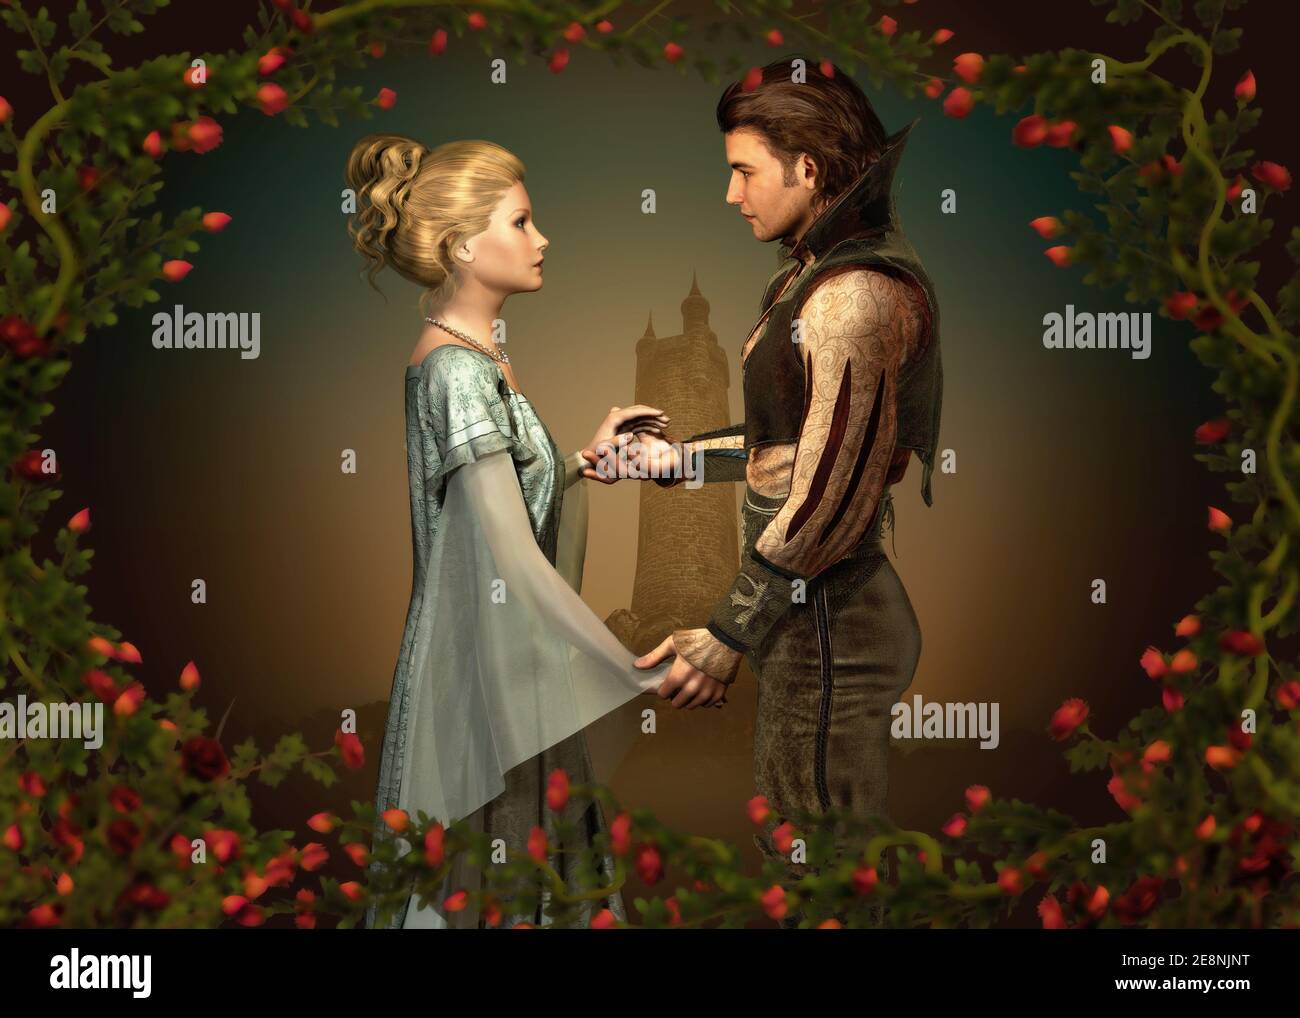 3d computer graphics of fairy tale scene with prince and princess Stock Photo